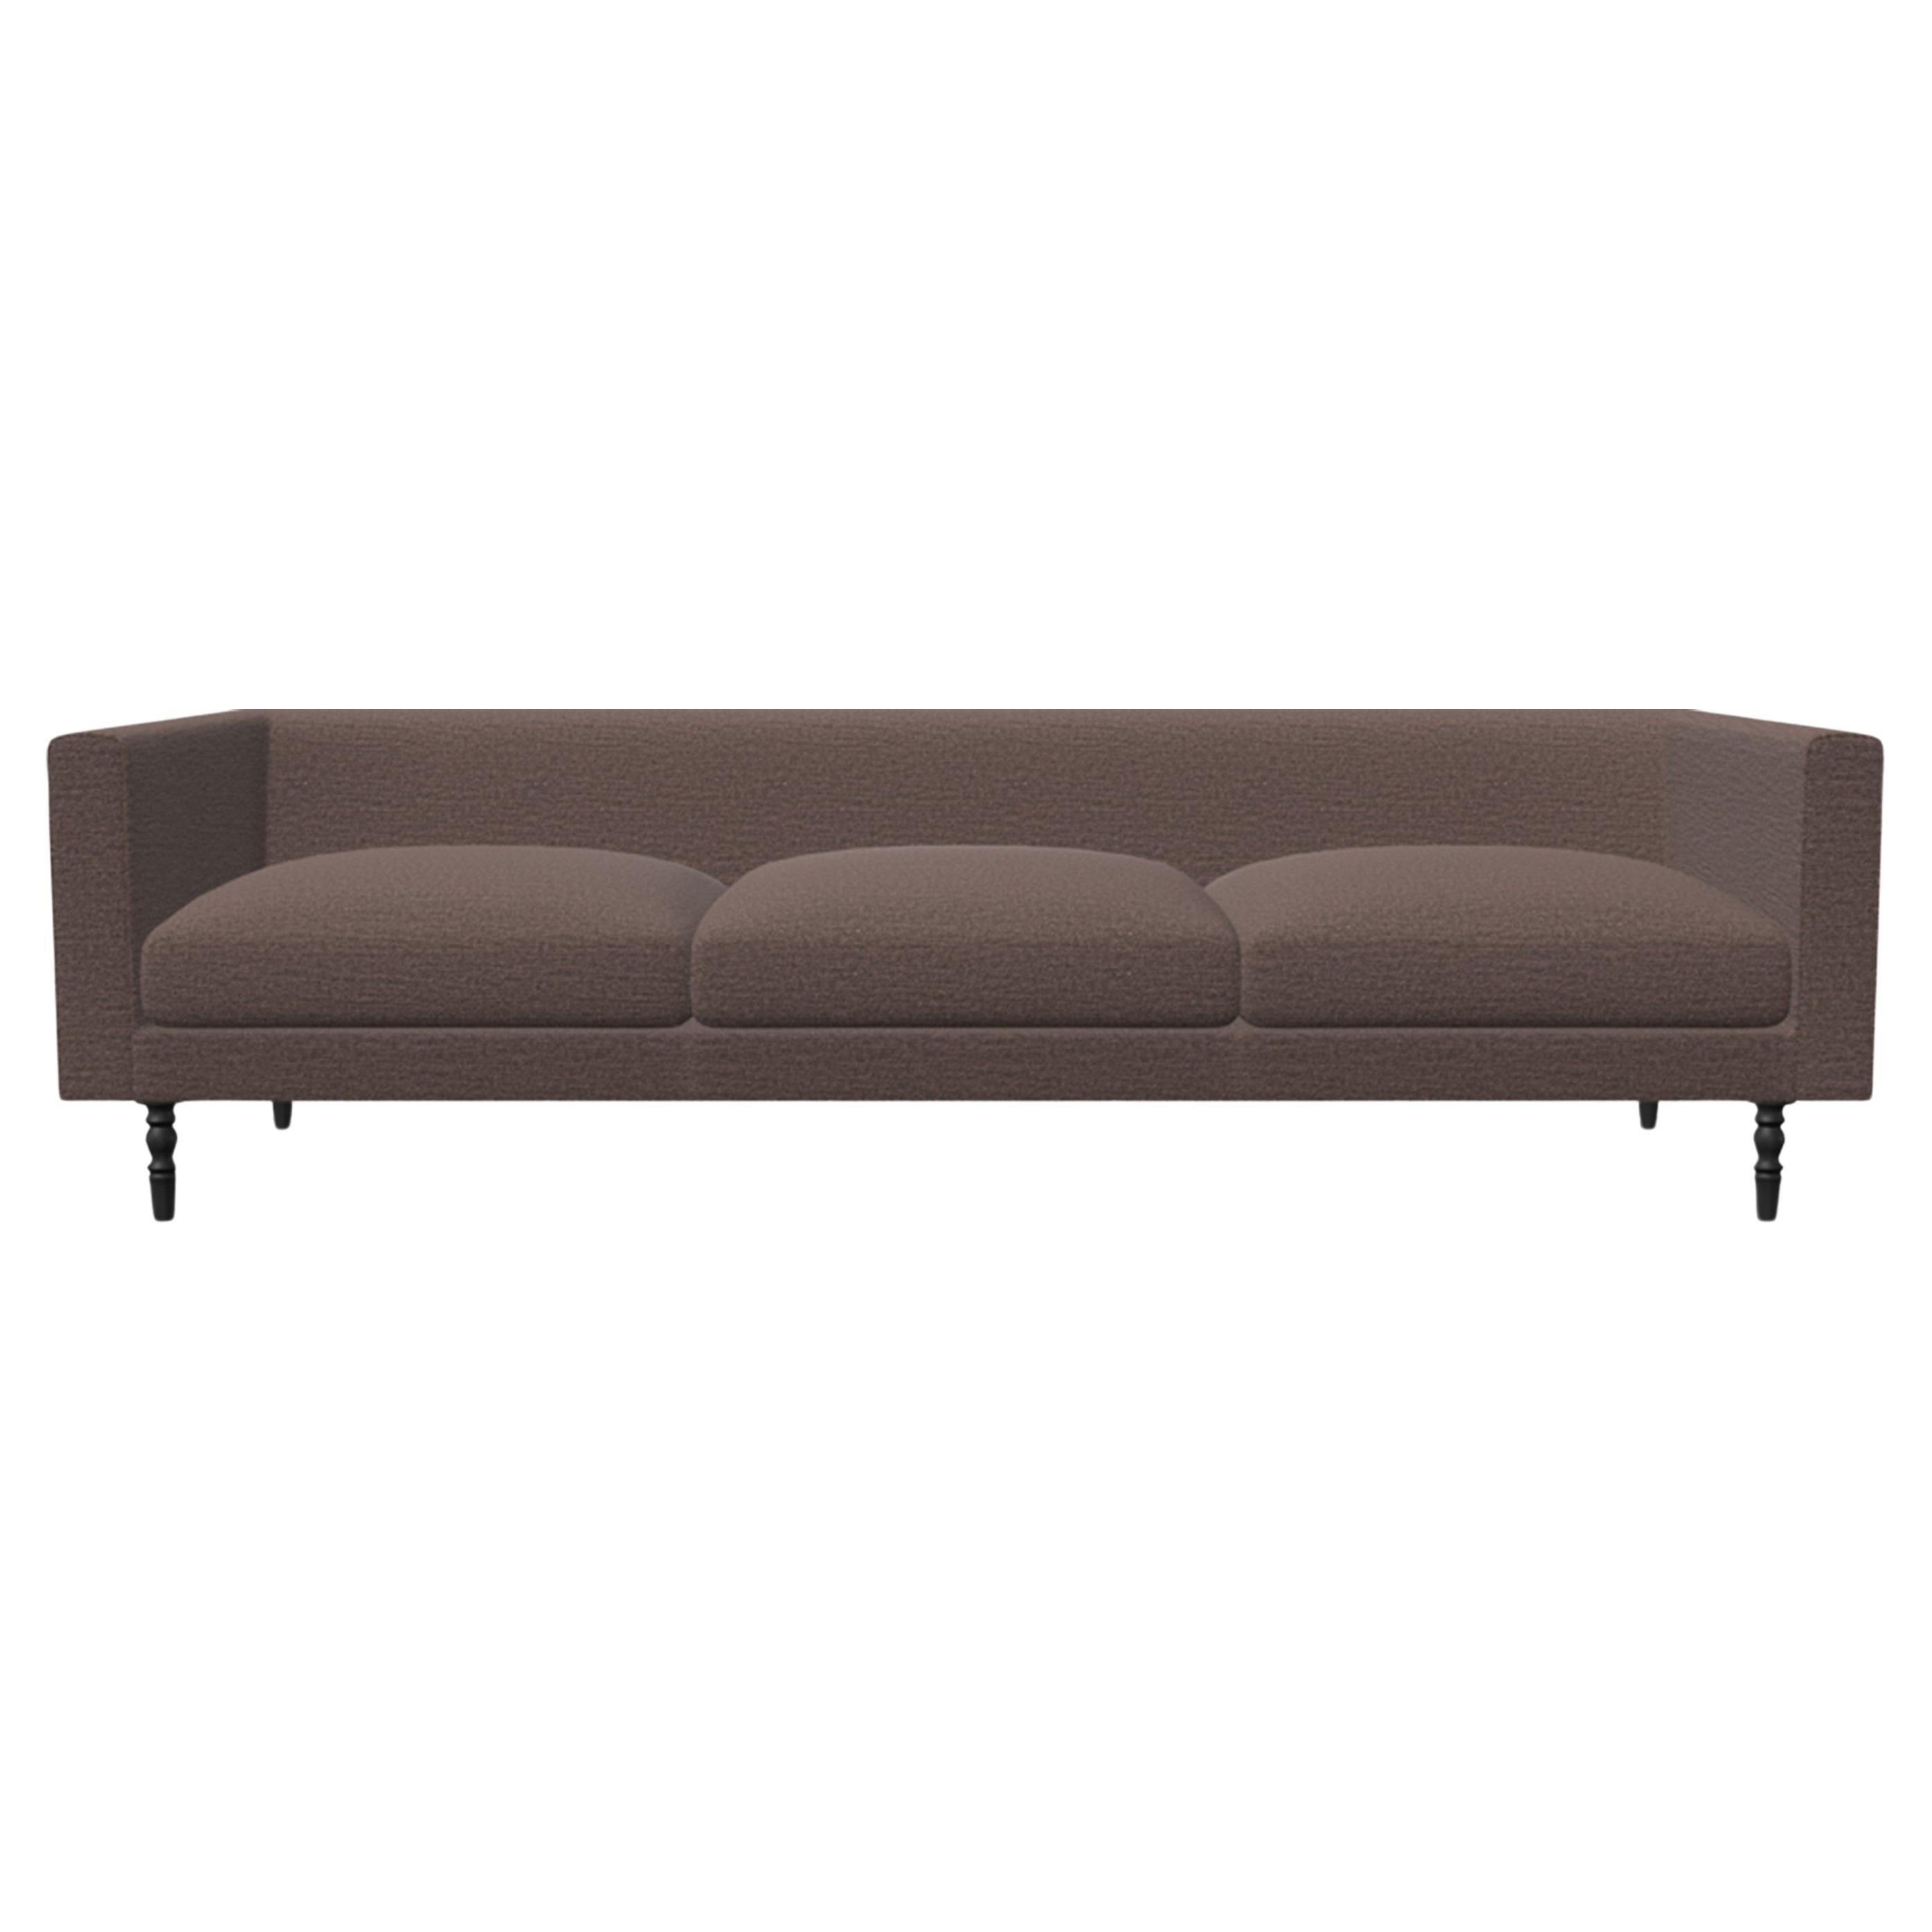 Moooi Boutique 3-Seat Sofa in Divina 3, 393 Upholstery with Pawn Legs For Sale